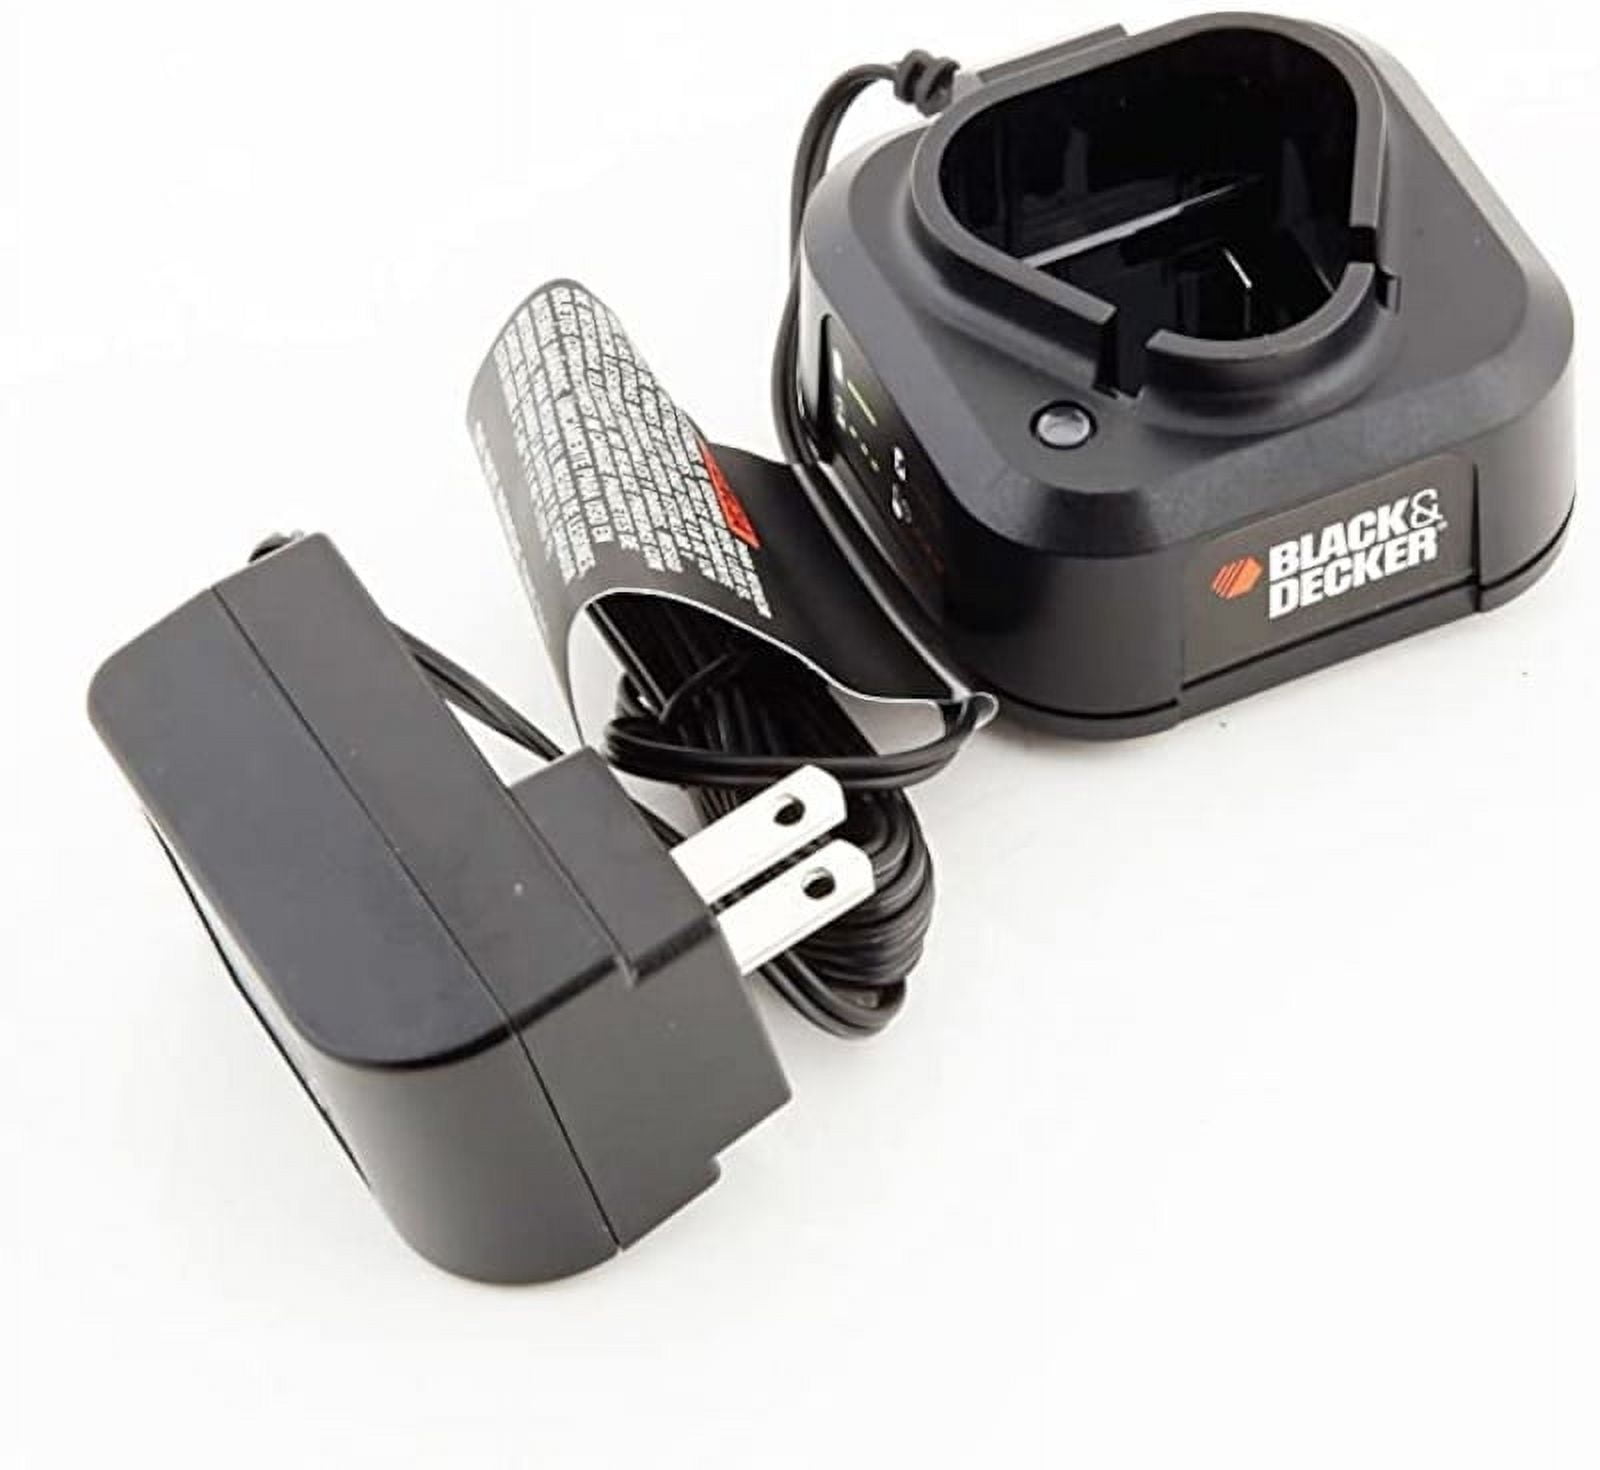 Black & Decker 90592257 Drill/Driver Battery Charger